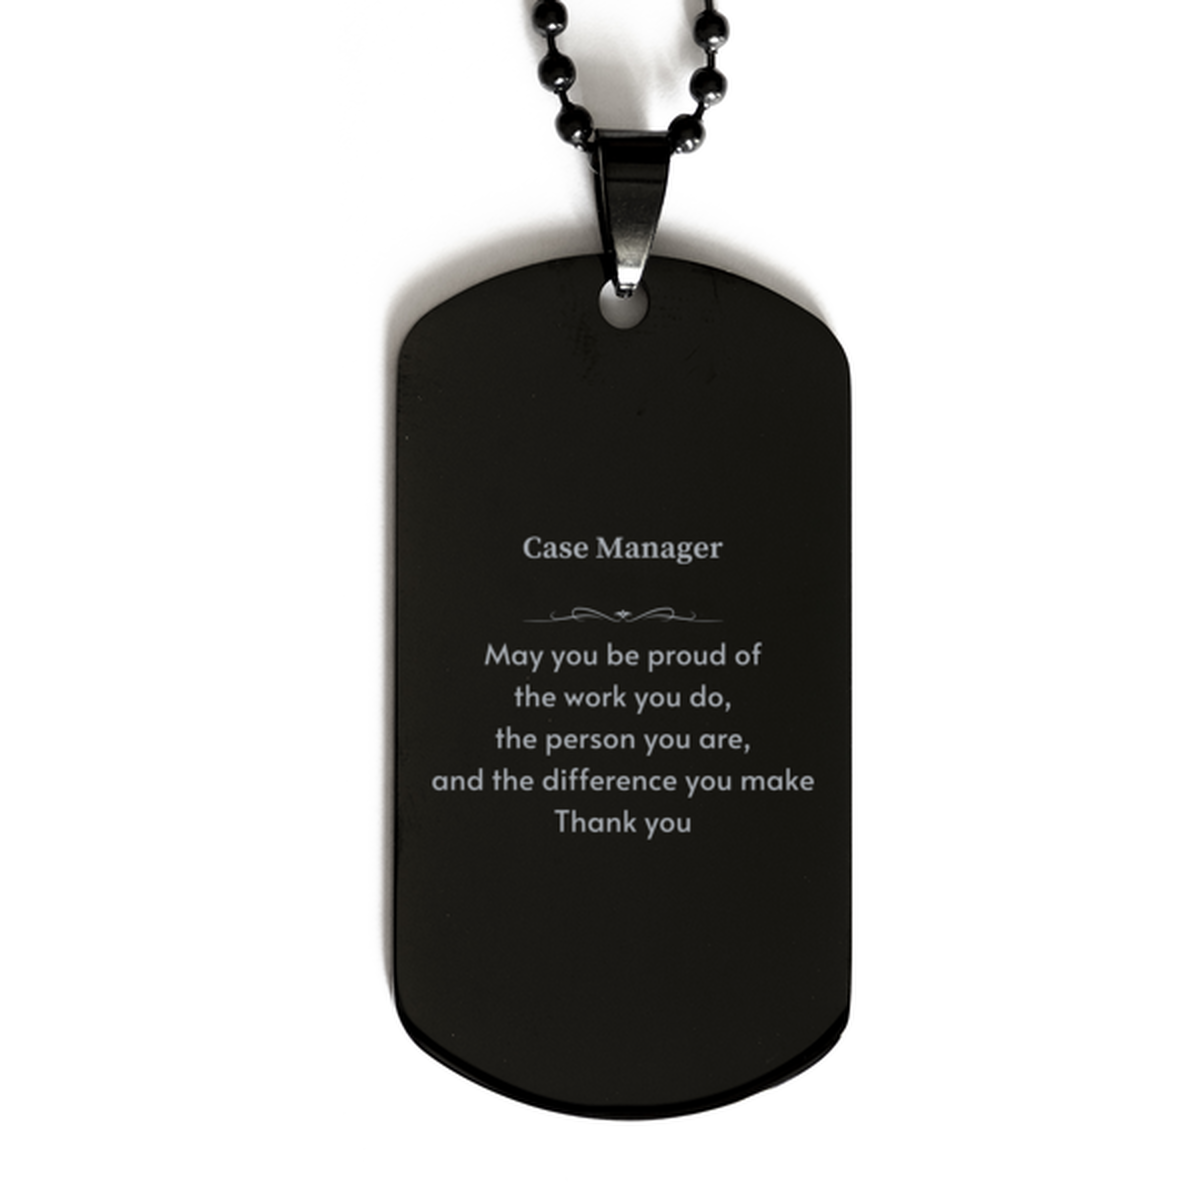 Heartwarming Black Dog Tag Retirement Coworkers Gifts for Case Manager, Case Manager May You be proud of the work you do, the person you are Gifts for Boss Men Women Friends